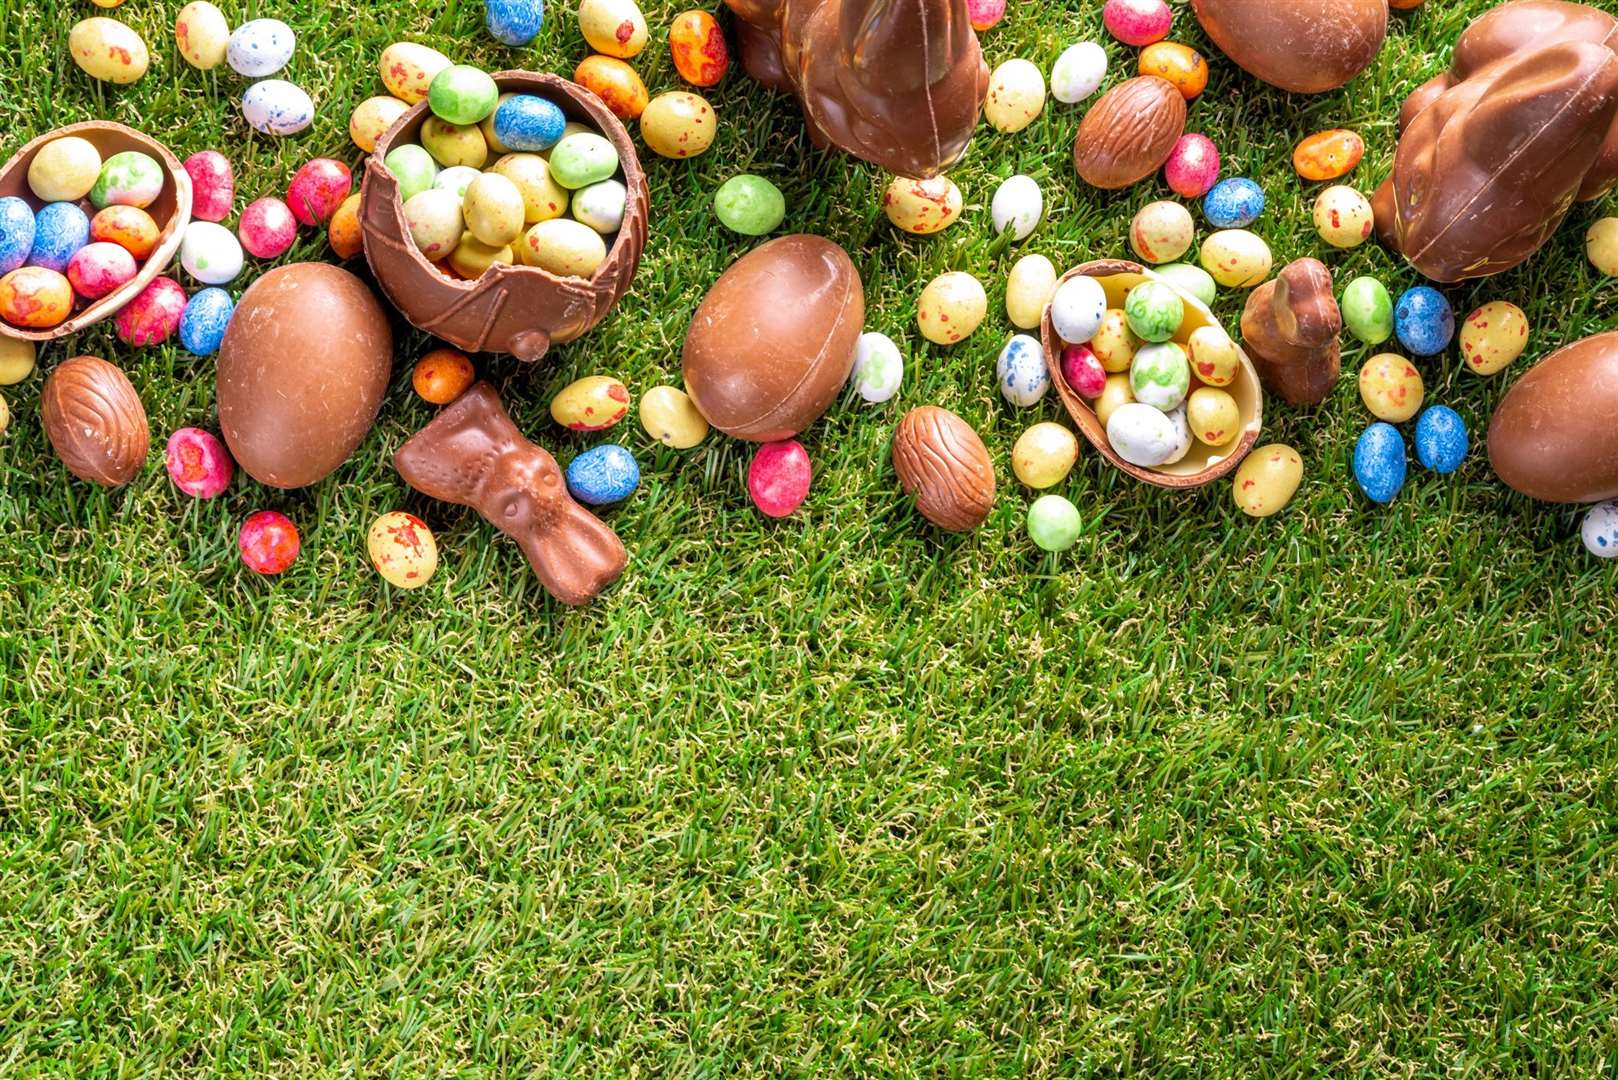 Are we led by the shops and being hurried into thinking about Easter and spring? Image: iStock.